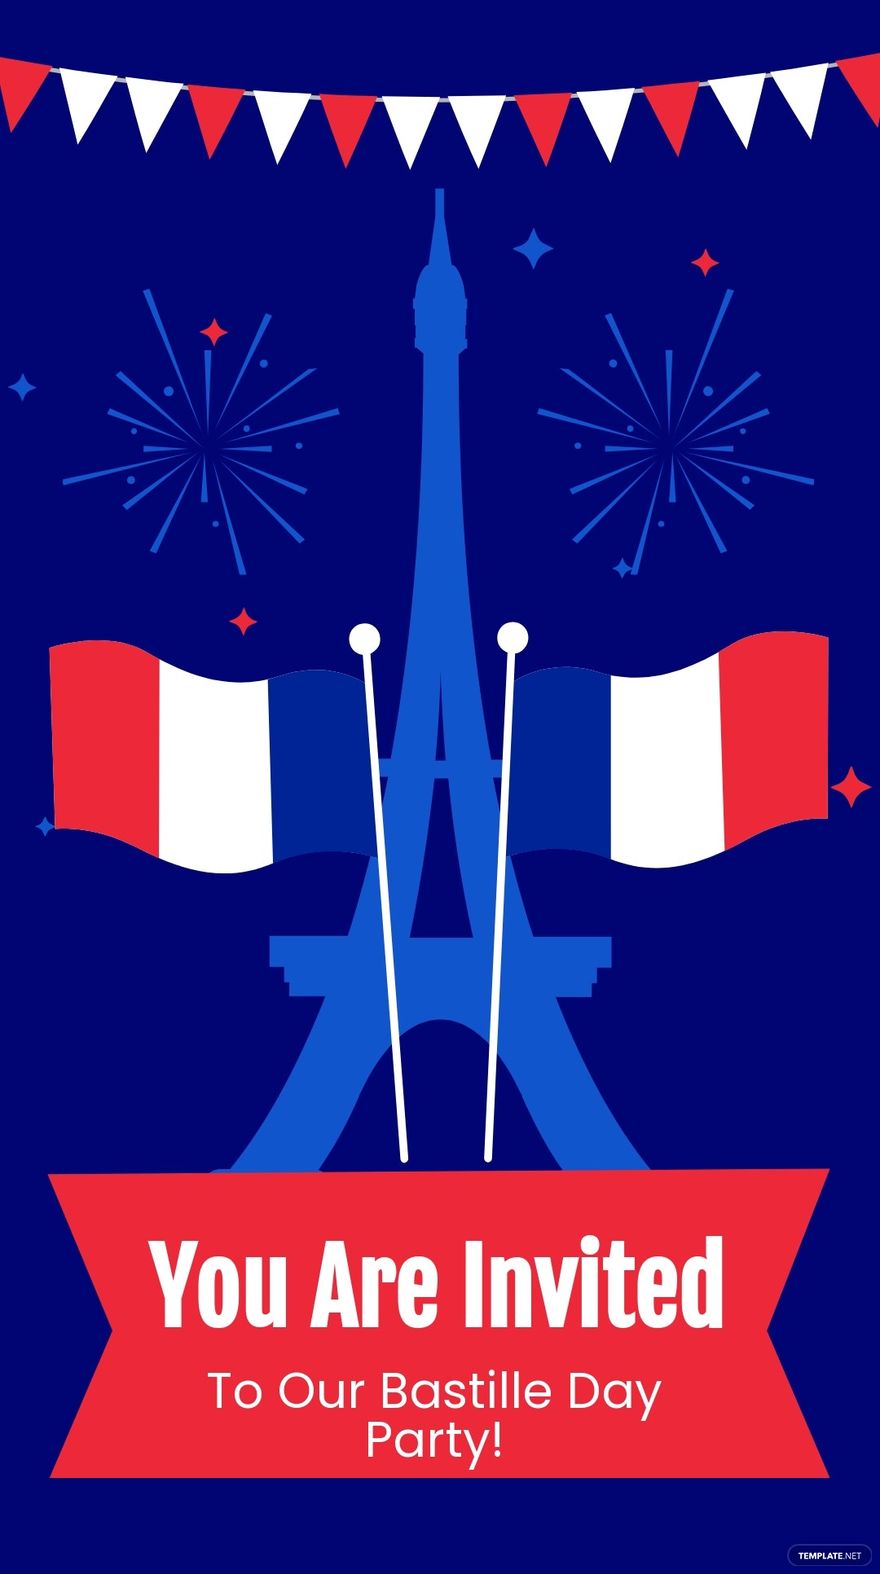 Free Bastille Day Party Instagram Story Template